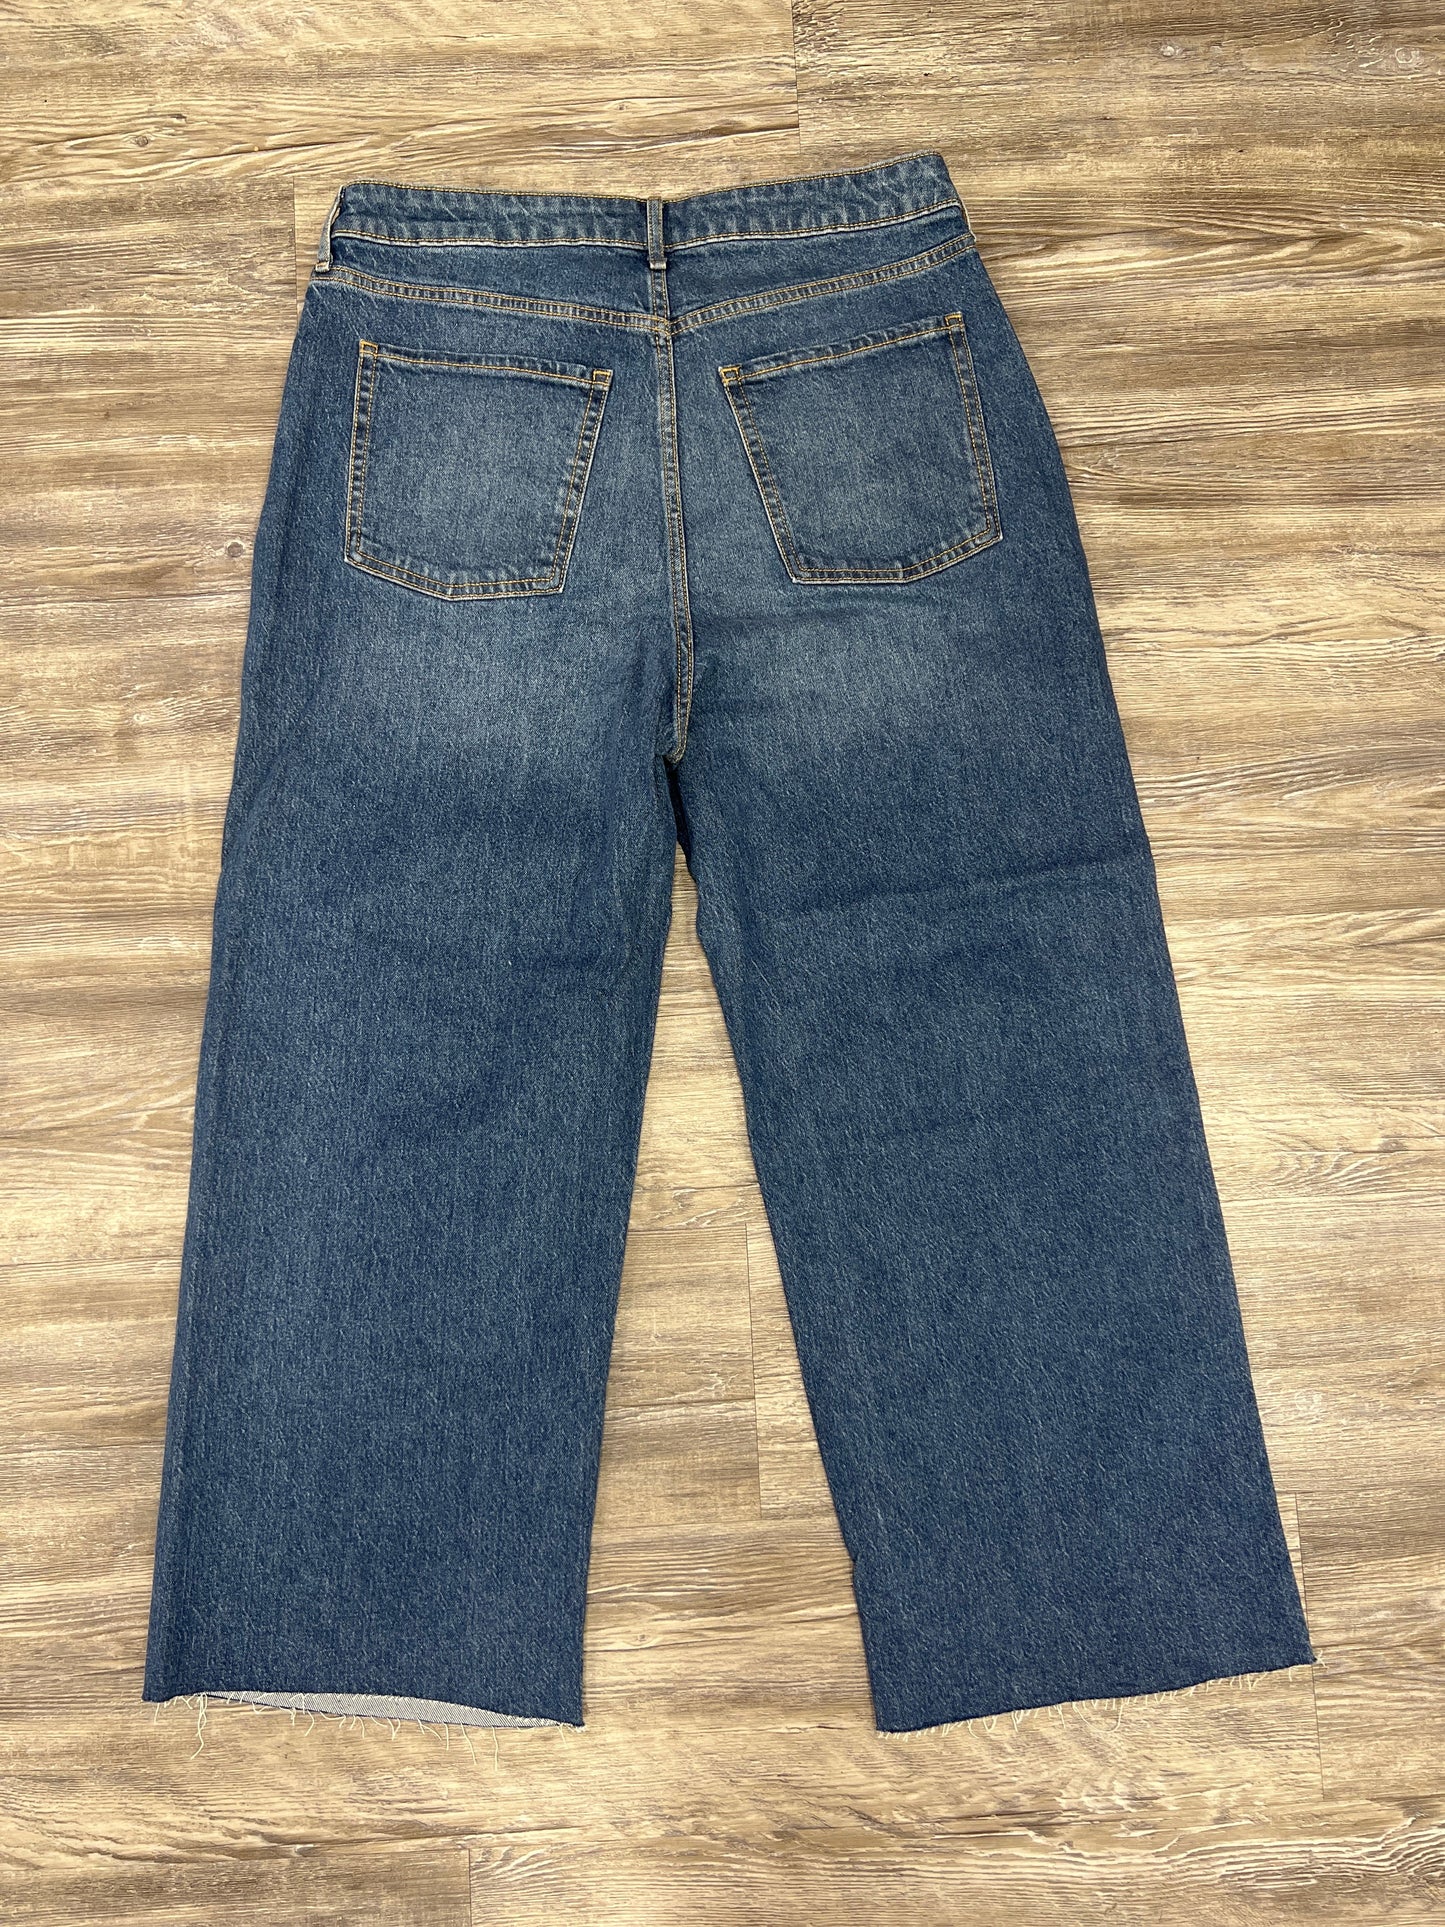 Jeans Wide Leg By Old Navy Size: 12